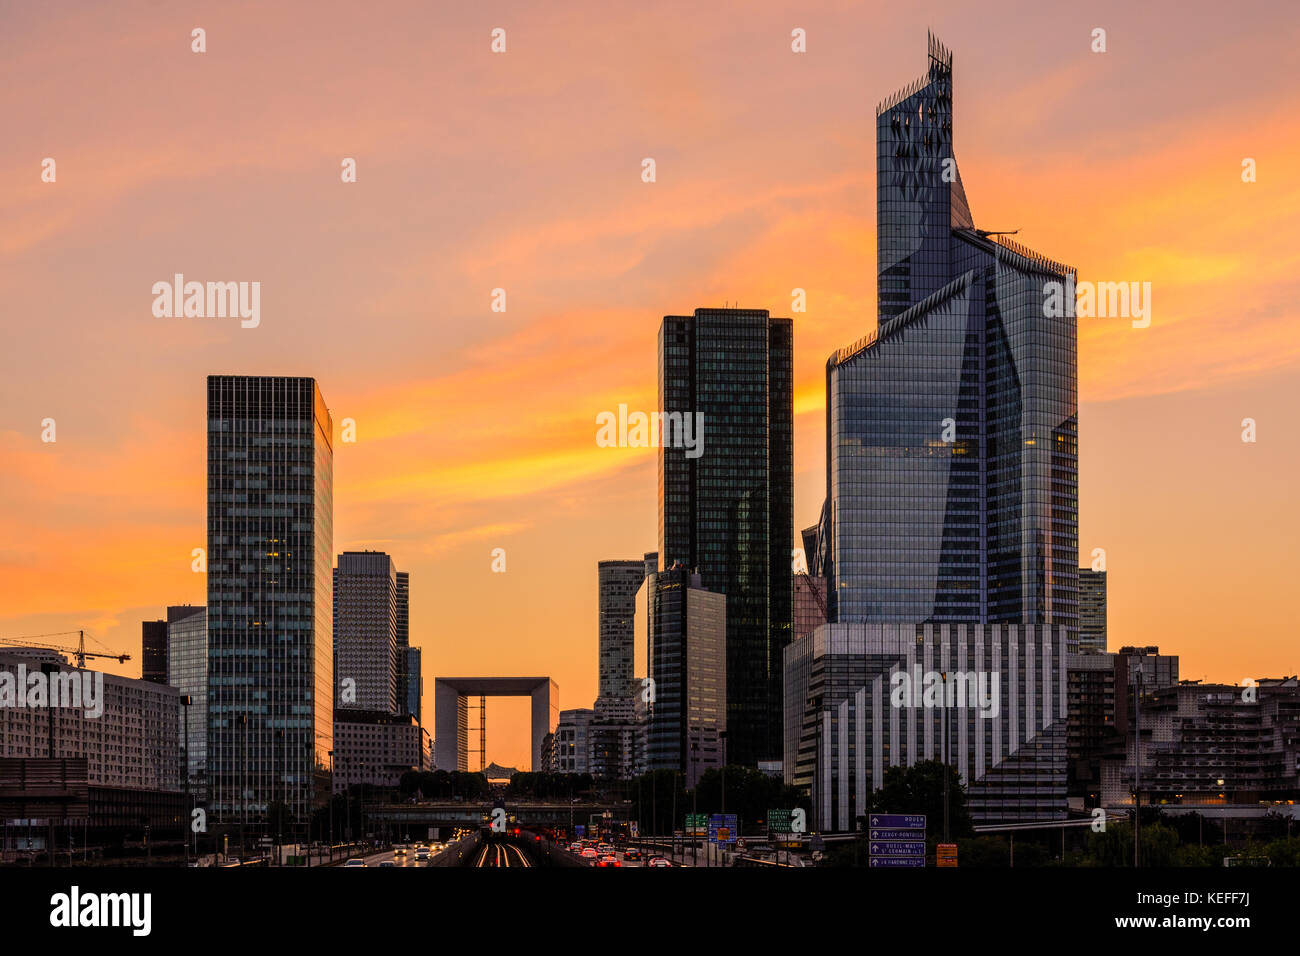 Skyline of Paris La Defense business district with the Grande Arche standing out against a glowing red sky. Stock Photo